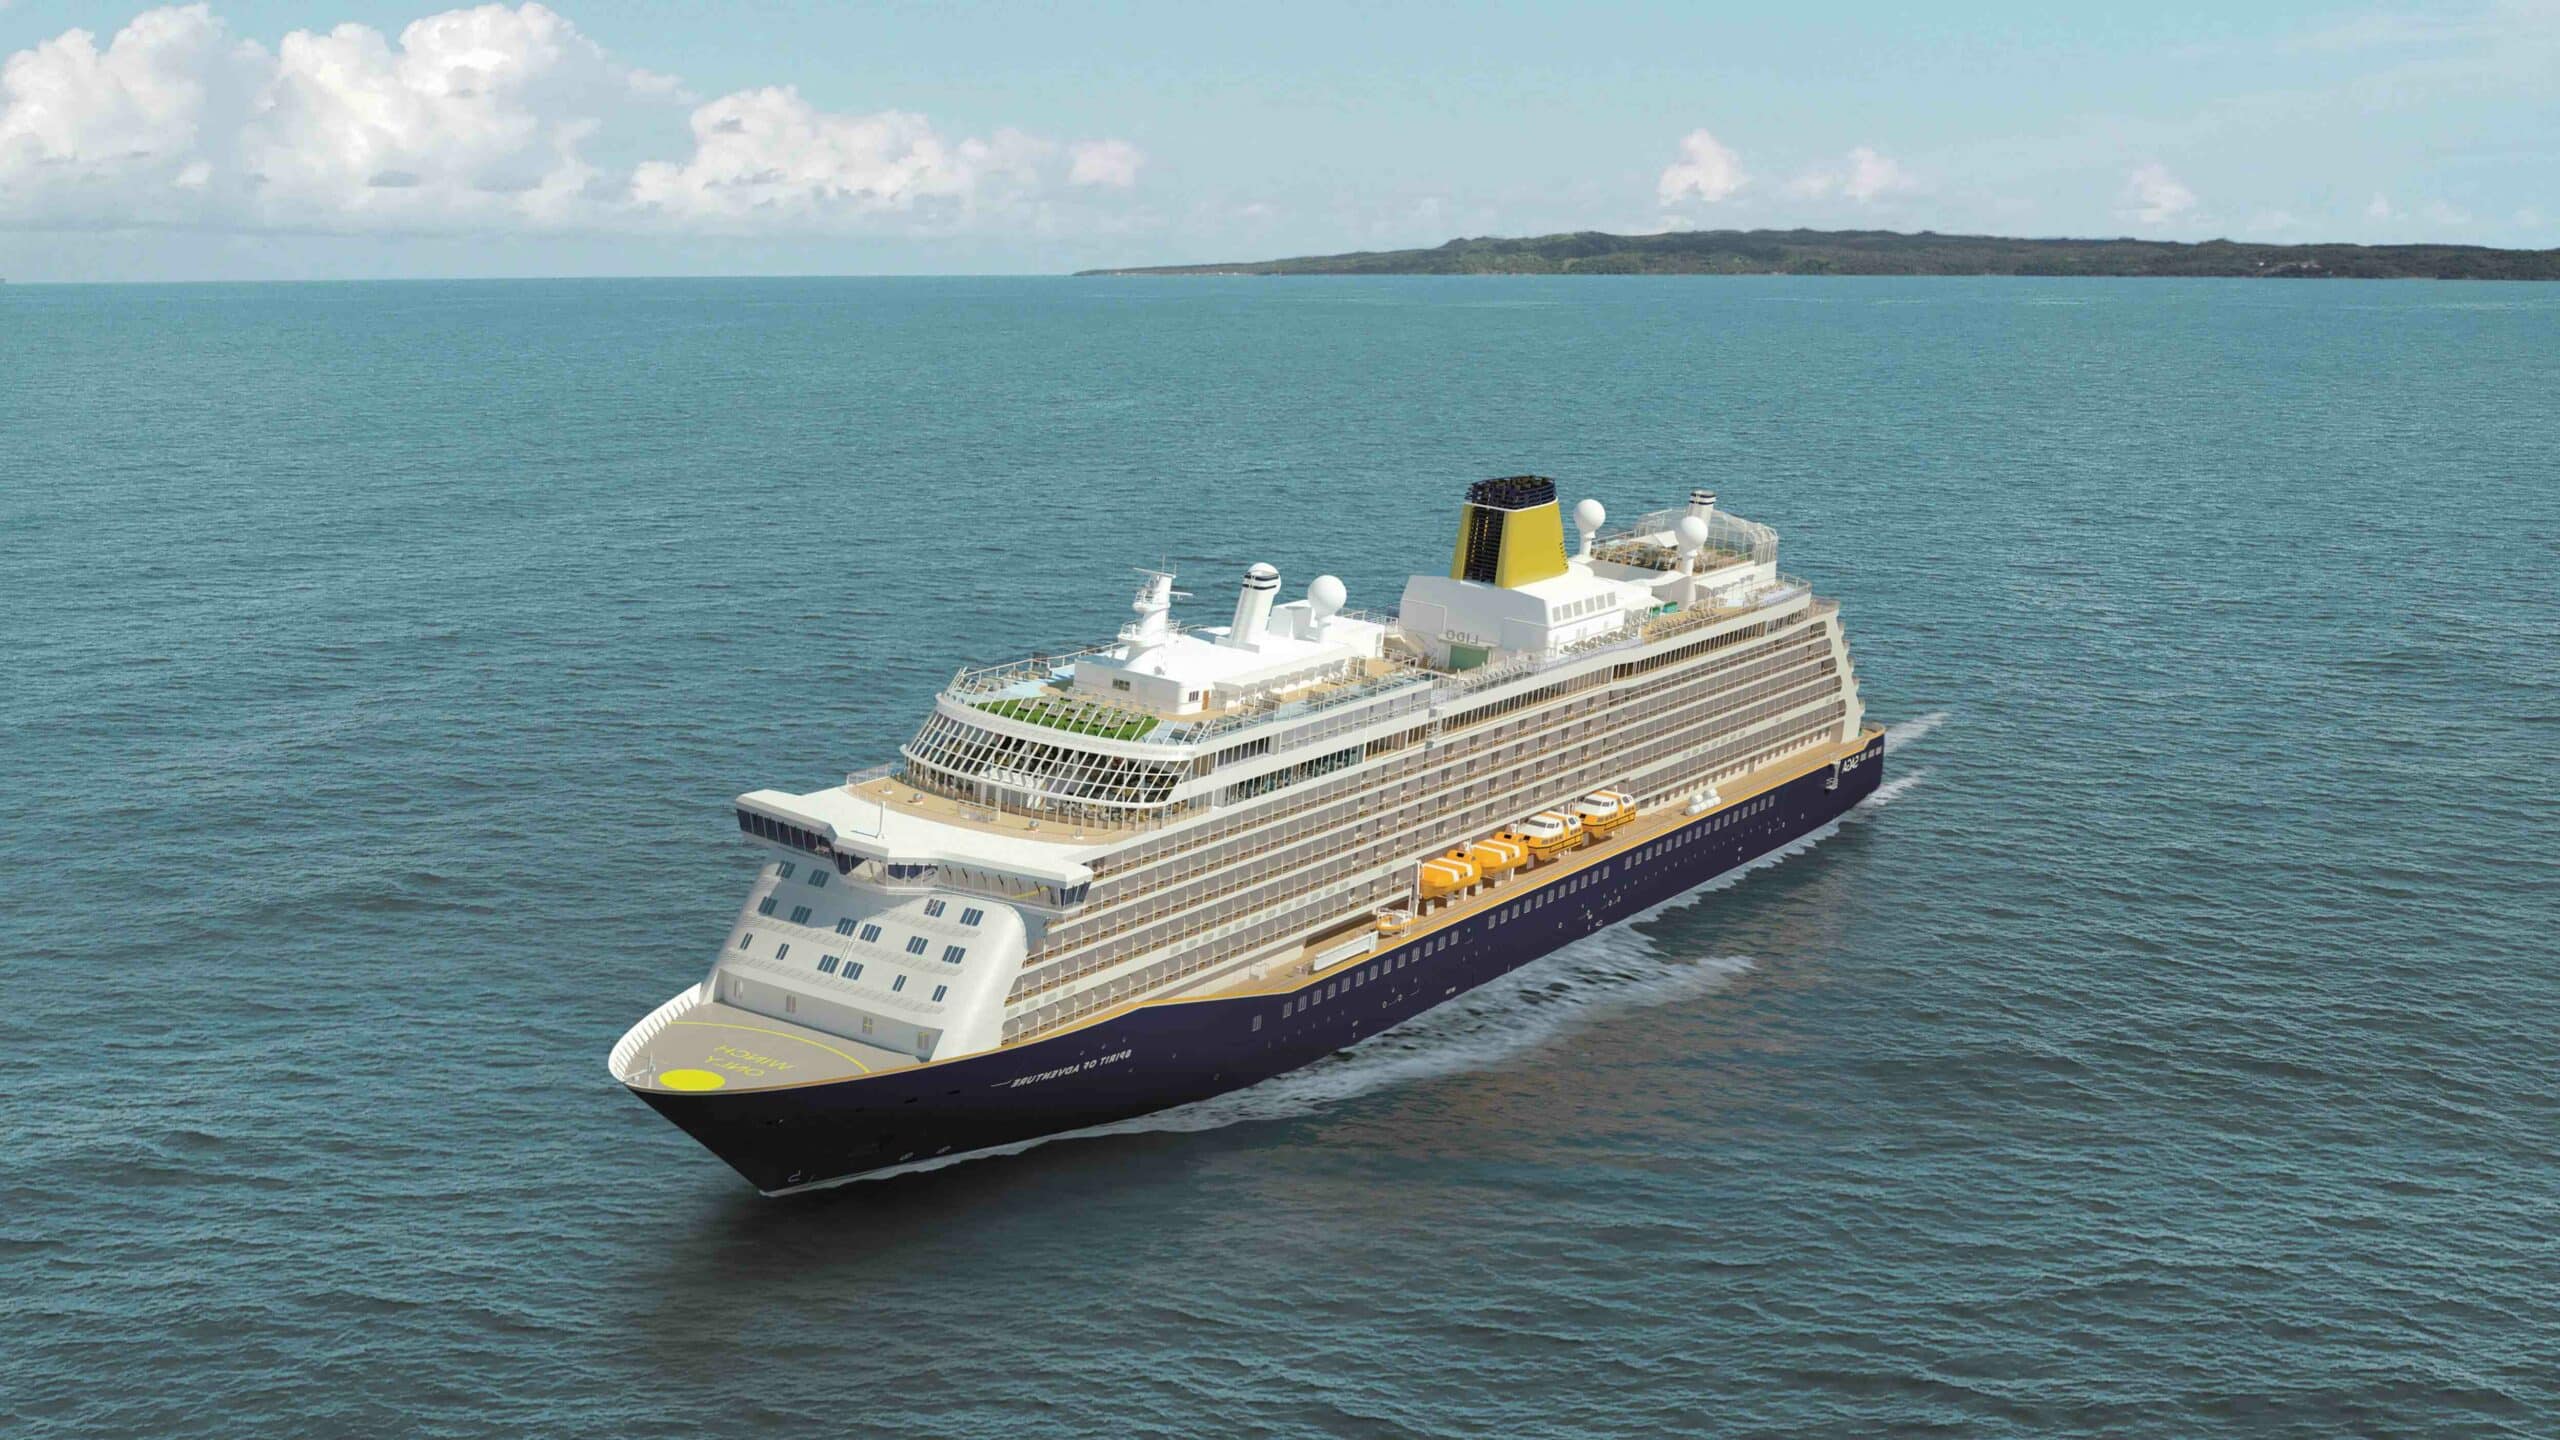 How to contact Costa Cruises?